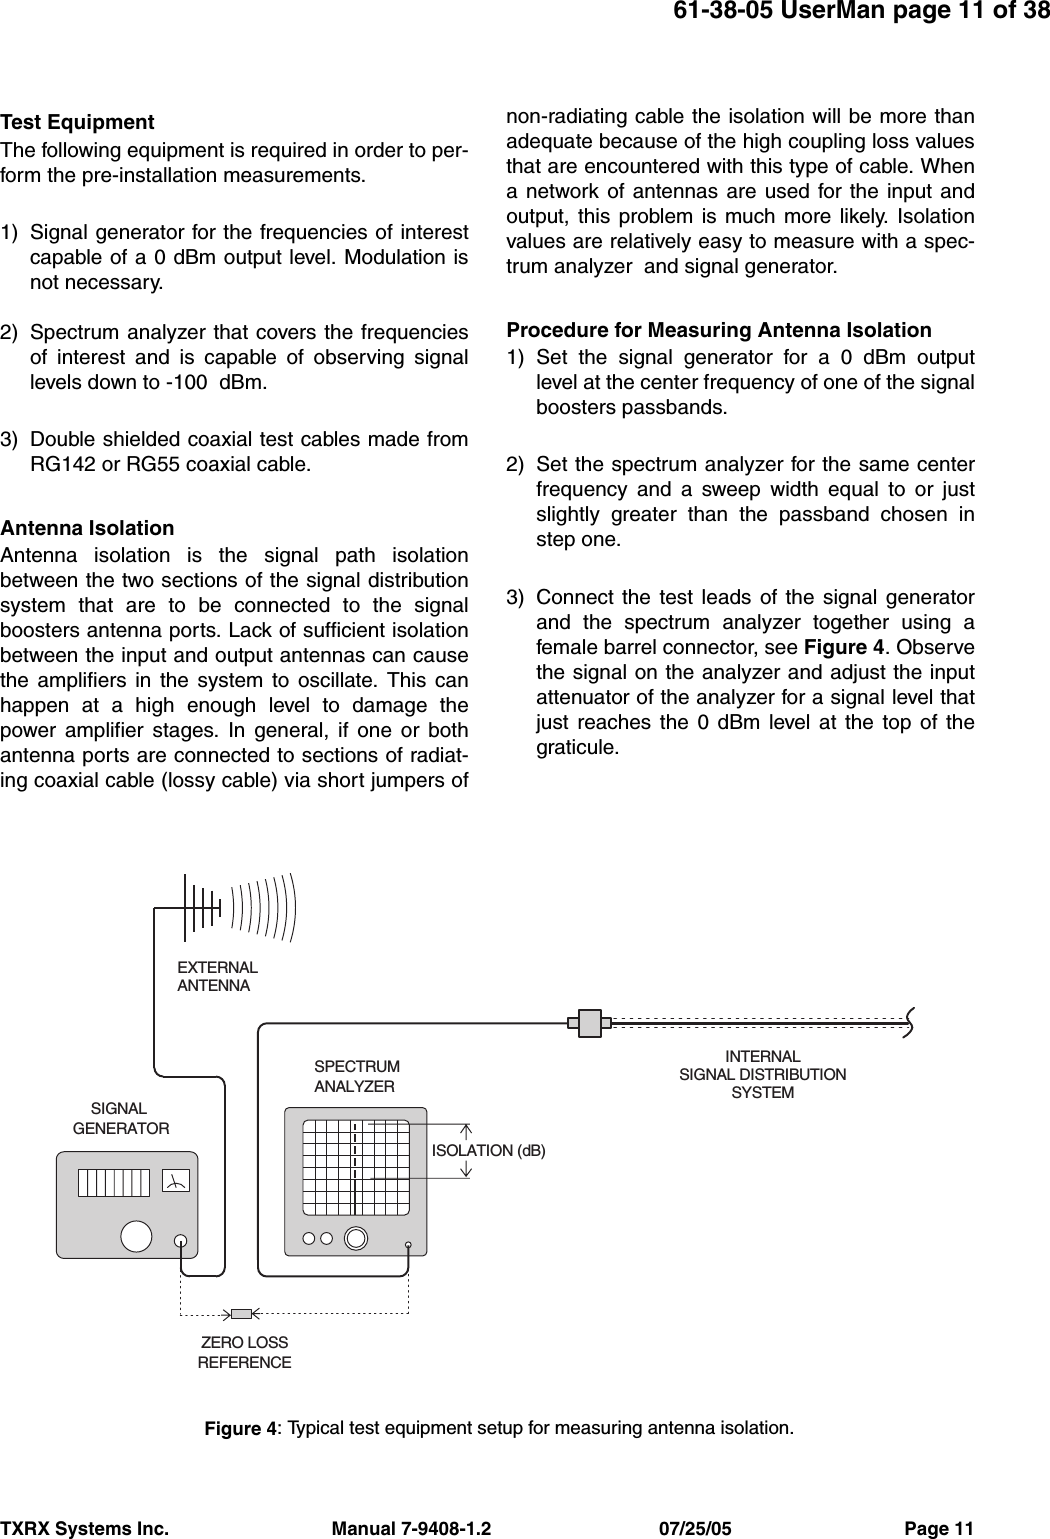 TXRX Systems Inc.                                Manual 7-9408-1.2                                 07/25/05                                  Page 1161-38-05 UserMan page 11 of 38Test EquipmentThe following equipment is required in order to per-form the pre-installation measurements.1) Signal generator for the frequencies of interestcapable of a 0 dBm output level. Modulation isnot necessary.2) Spectrum analyzer that covers the frequenciesof interest and is capable of observing signallevels down to -100  dBm.3) Double shielded coaxial test cables made fromRG142 or RG55 coaxial cable.Antenna Isolation Antenna isolation is the signal path isolationbetween the two sections of the signal distributionsystem that are to be connected to the signalboosters antenna ports. Lack of sufficient isolationbetween the input and output antennas can causethe amplifiers in the system to oscillate. This canhappen at a high enough level to damage thepower amplifier stages. In general, if one or bothantenna ports are connected to sections of radiat-ing coaxial cable (lossy cable) via short jumpers ofnon-radiating cable the isolation will be more thanadequate because of the high coupling loss valuesthat are encountered with this type of cable. Whena network of antennas are used for the input andoutput, this problem is much more likely. Isolationvalues are relatively easy to measure with a spec-trum analyzer  and signal generator.Procedure for Measuring Antenna Isolation1) Set the signal generator for a 0 dBm outputlevel at the center frequency of one of the signalboosters passbands.2) Set the spectrum analyzer for the same centerfrequency and a sweep width equal to or justslightly greater than the passband chosen instep one.3) Connect the test leads of the signal generatorand the spectrum analyzer together using afemale barrel connector, see Figure 4. Observethe signal on the analyzer and adjust the inputattenuator of the analyzer for a signal level thatjust reaches the 0 dBm level at the top of thegraticule. INTERNALSIGNAL DISTRIBUTIONSYSTEMSPECTRUMANALYZEREXTERNALANTENNASIGNALGENERATORZERO LOSSREFERENCEISOLATION (dB)Figure 4: Typical test equipment setup for measuring antenna isolation.